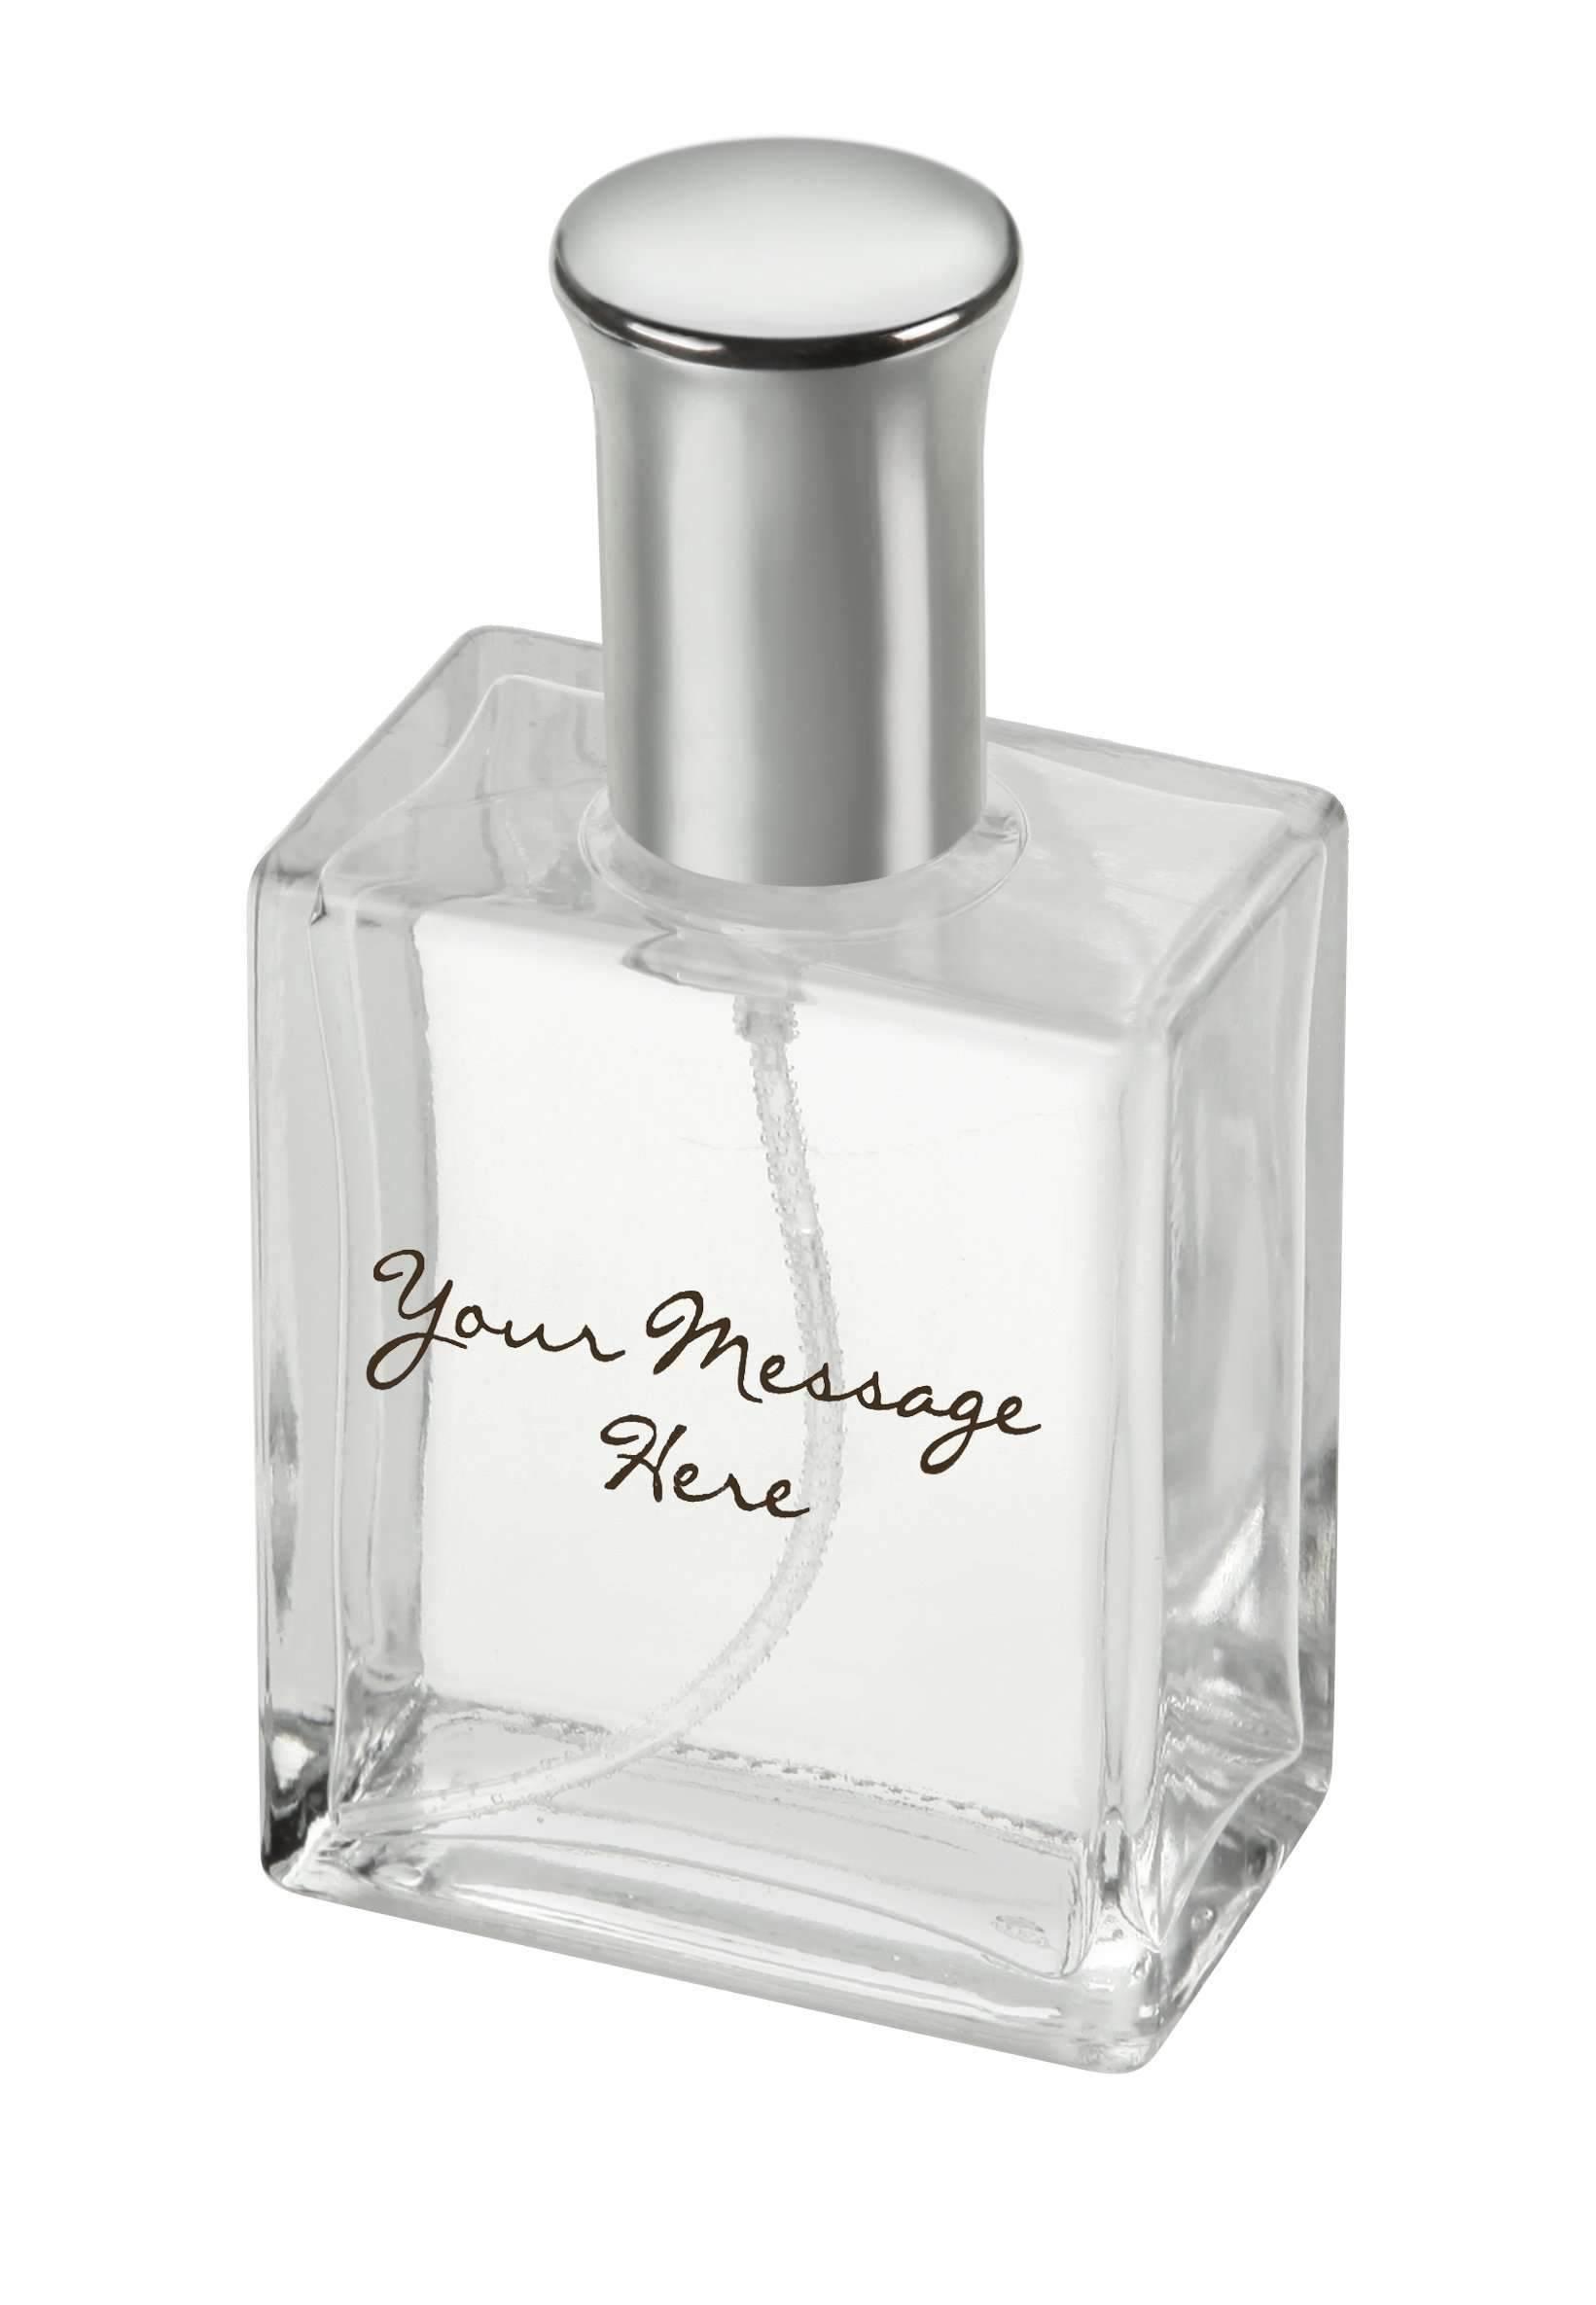 38% off on JUCE 50ml Inspired Fragrances